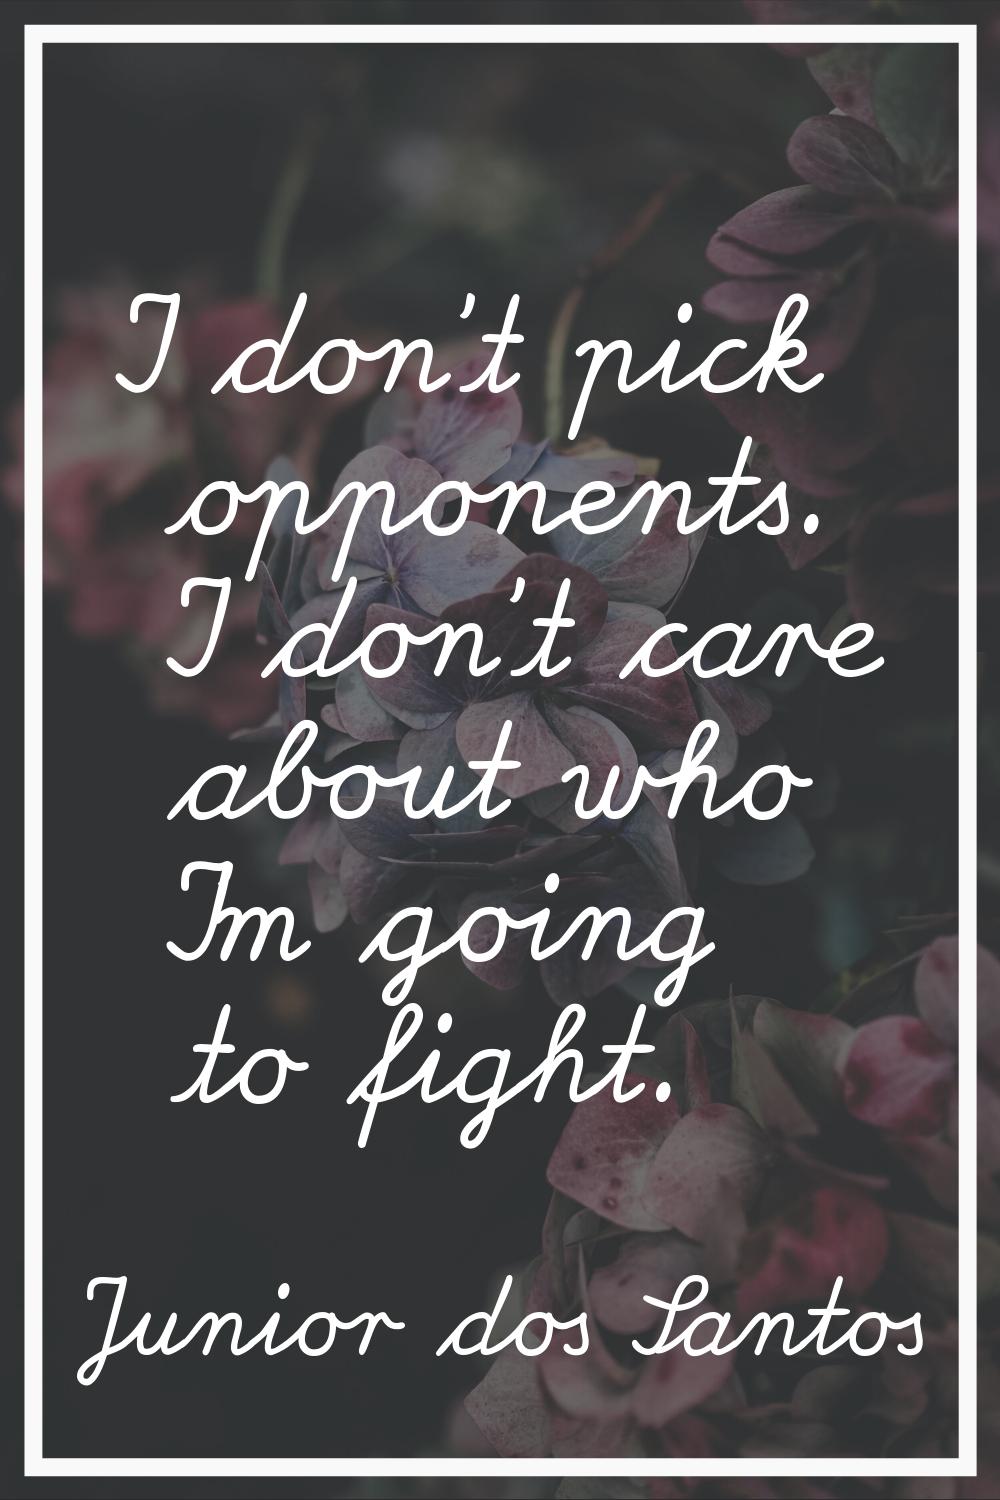 I don't pick opponents. I don't care about who I'm going to fight.